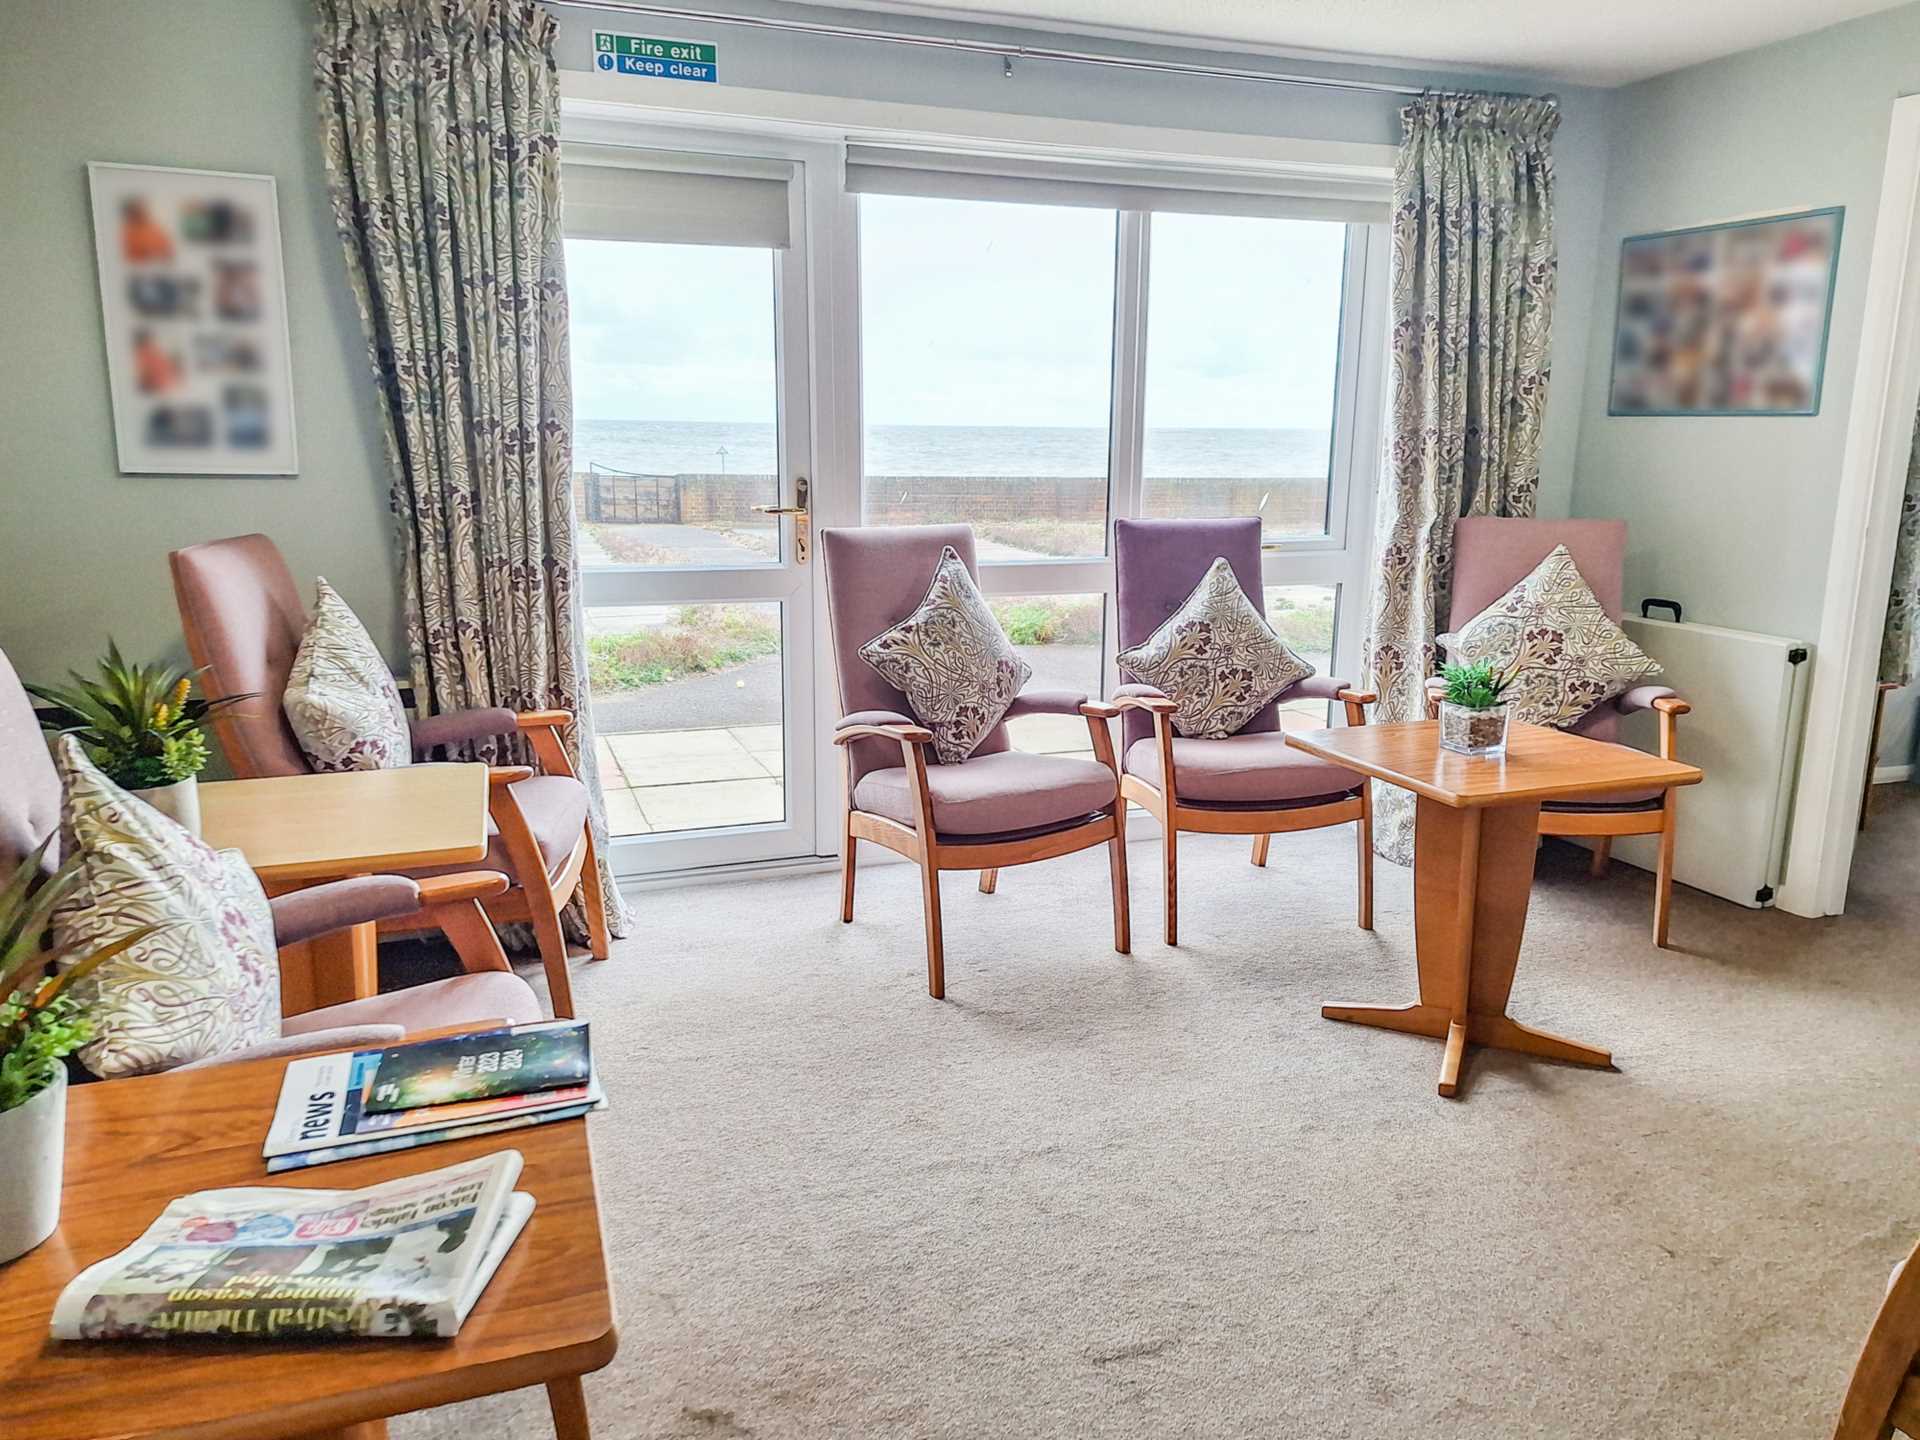 Seaview Court, Selsey, Image 13